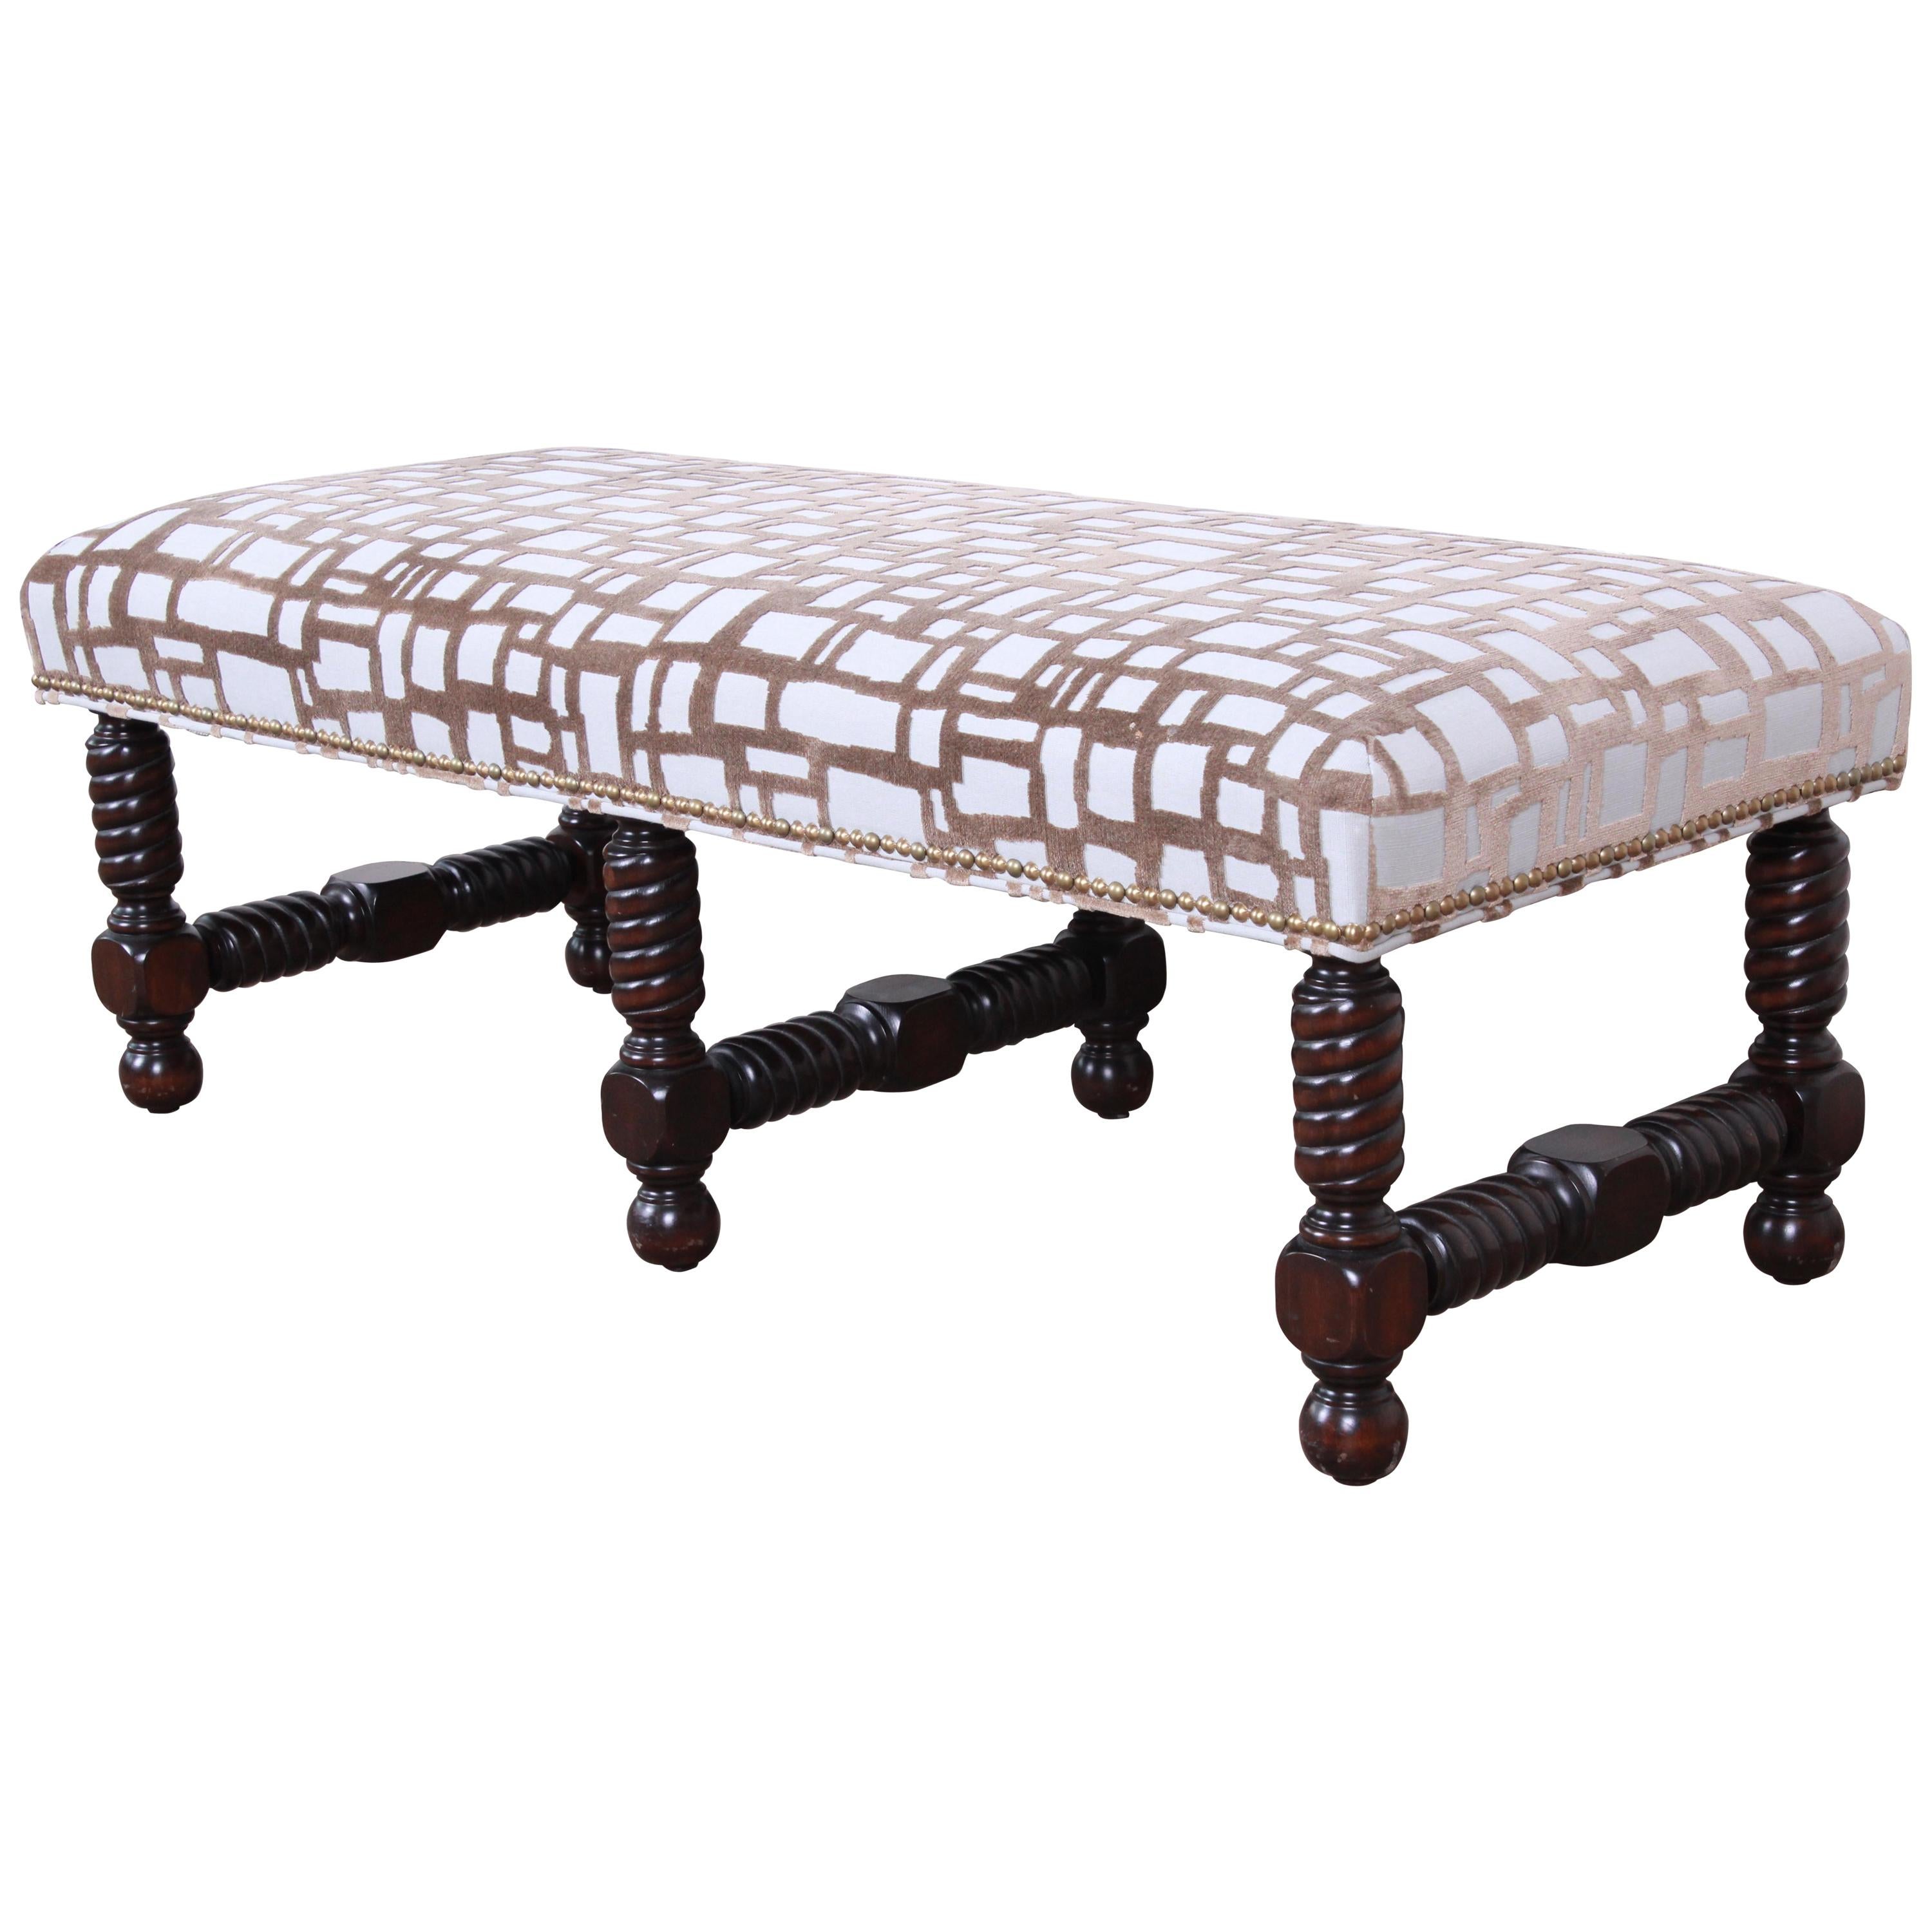 Contemporary Transitional Jacobean Revival Walnut Upholstered Bench